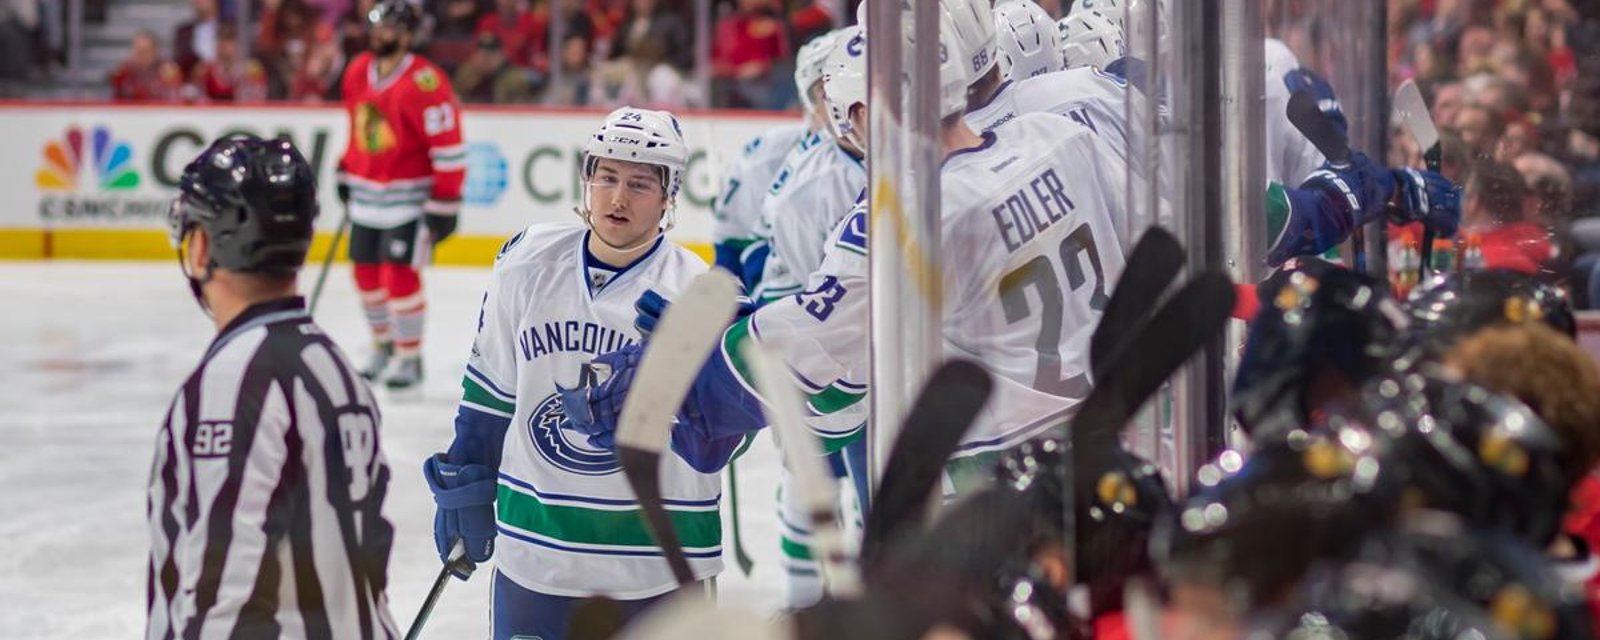 Canucks just extended forward's contract. 